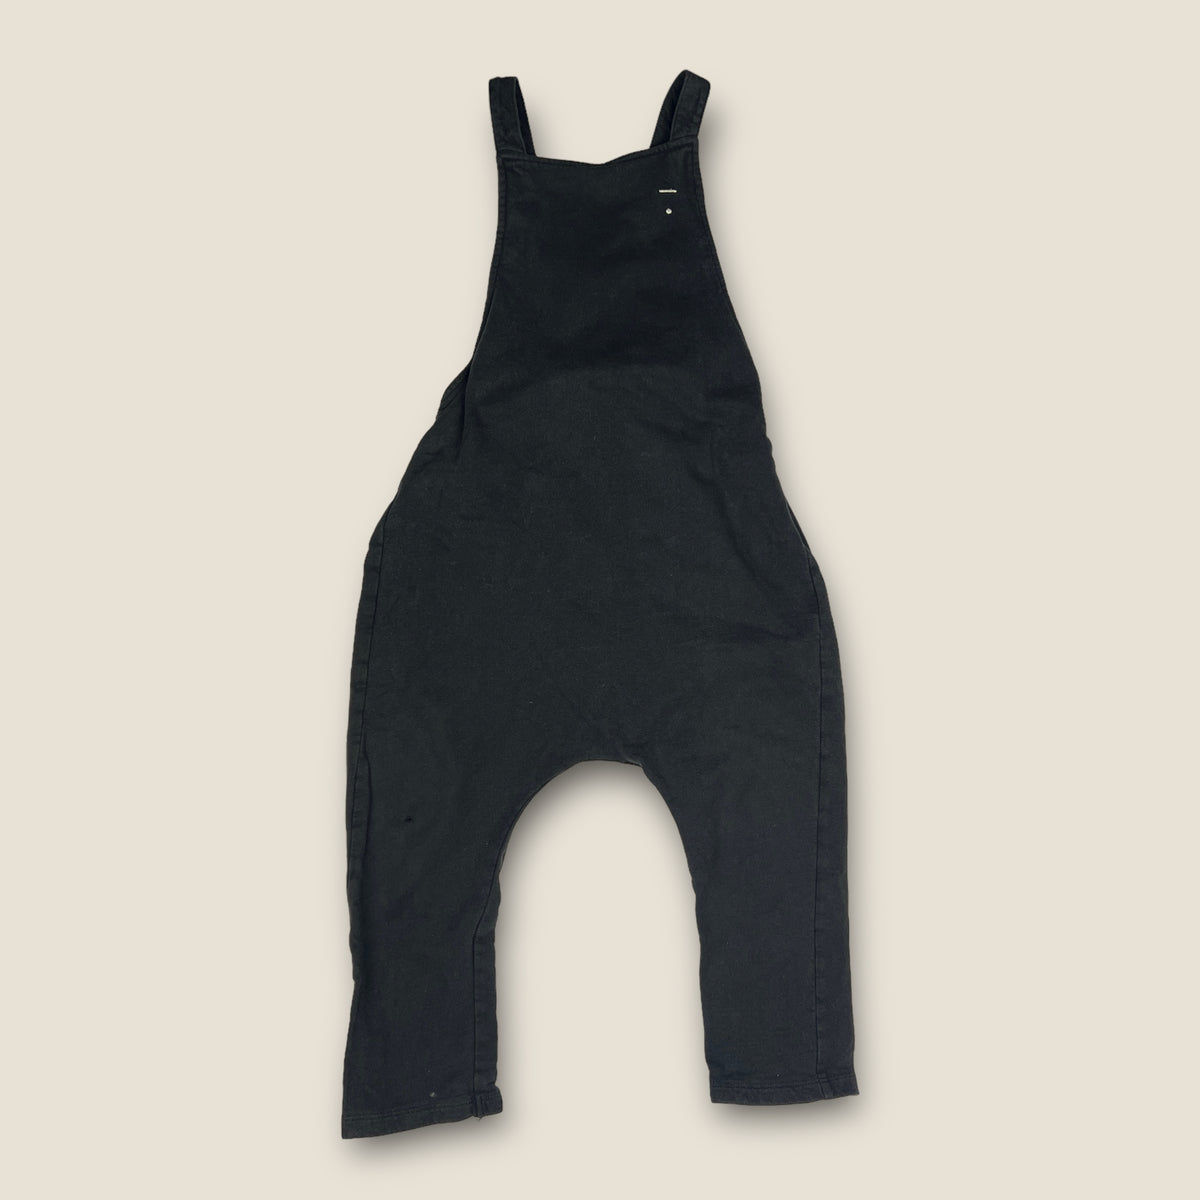 Gray Label Salopettes in Black size 5-6 years